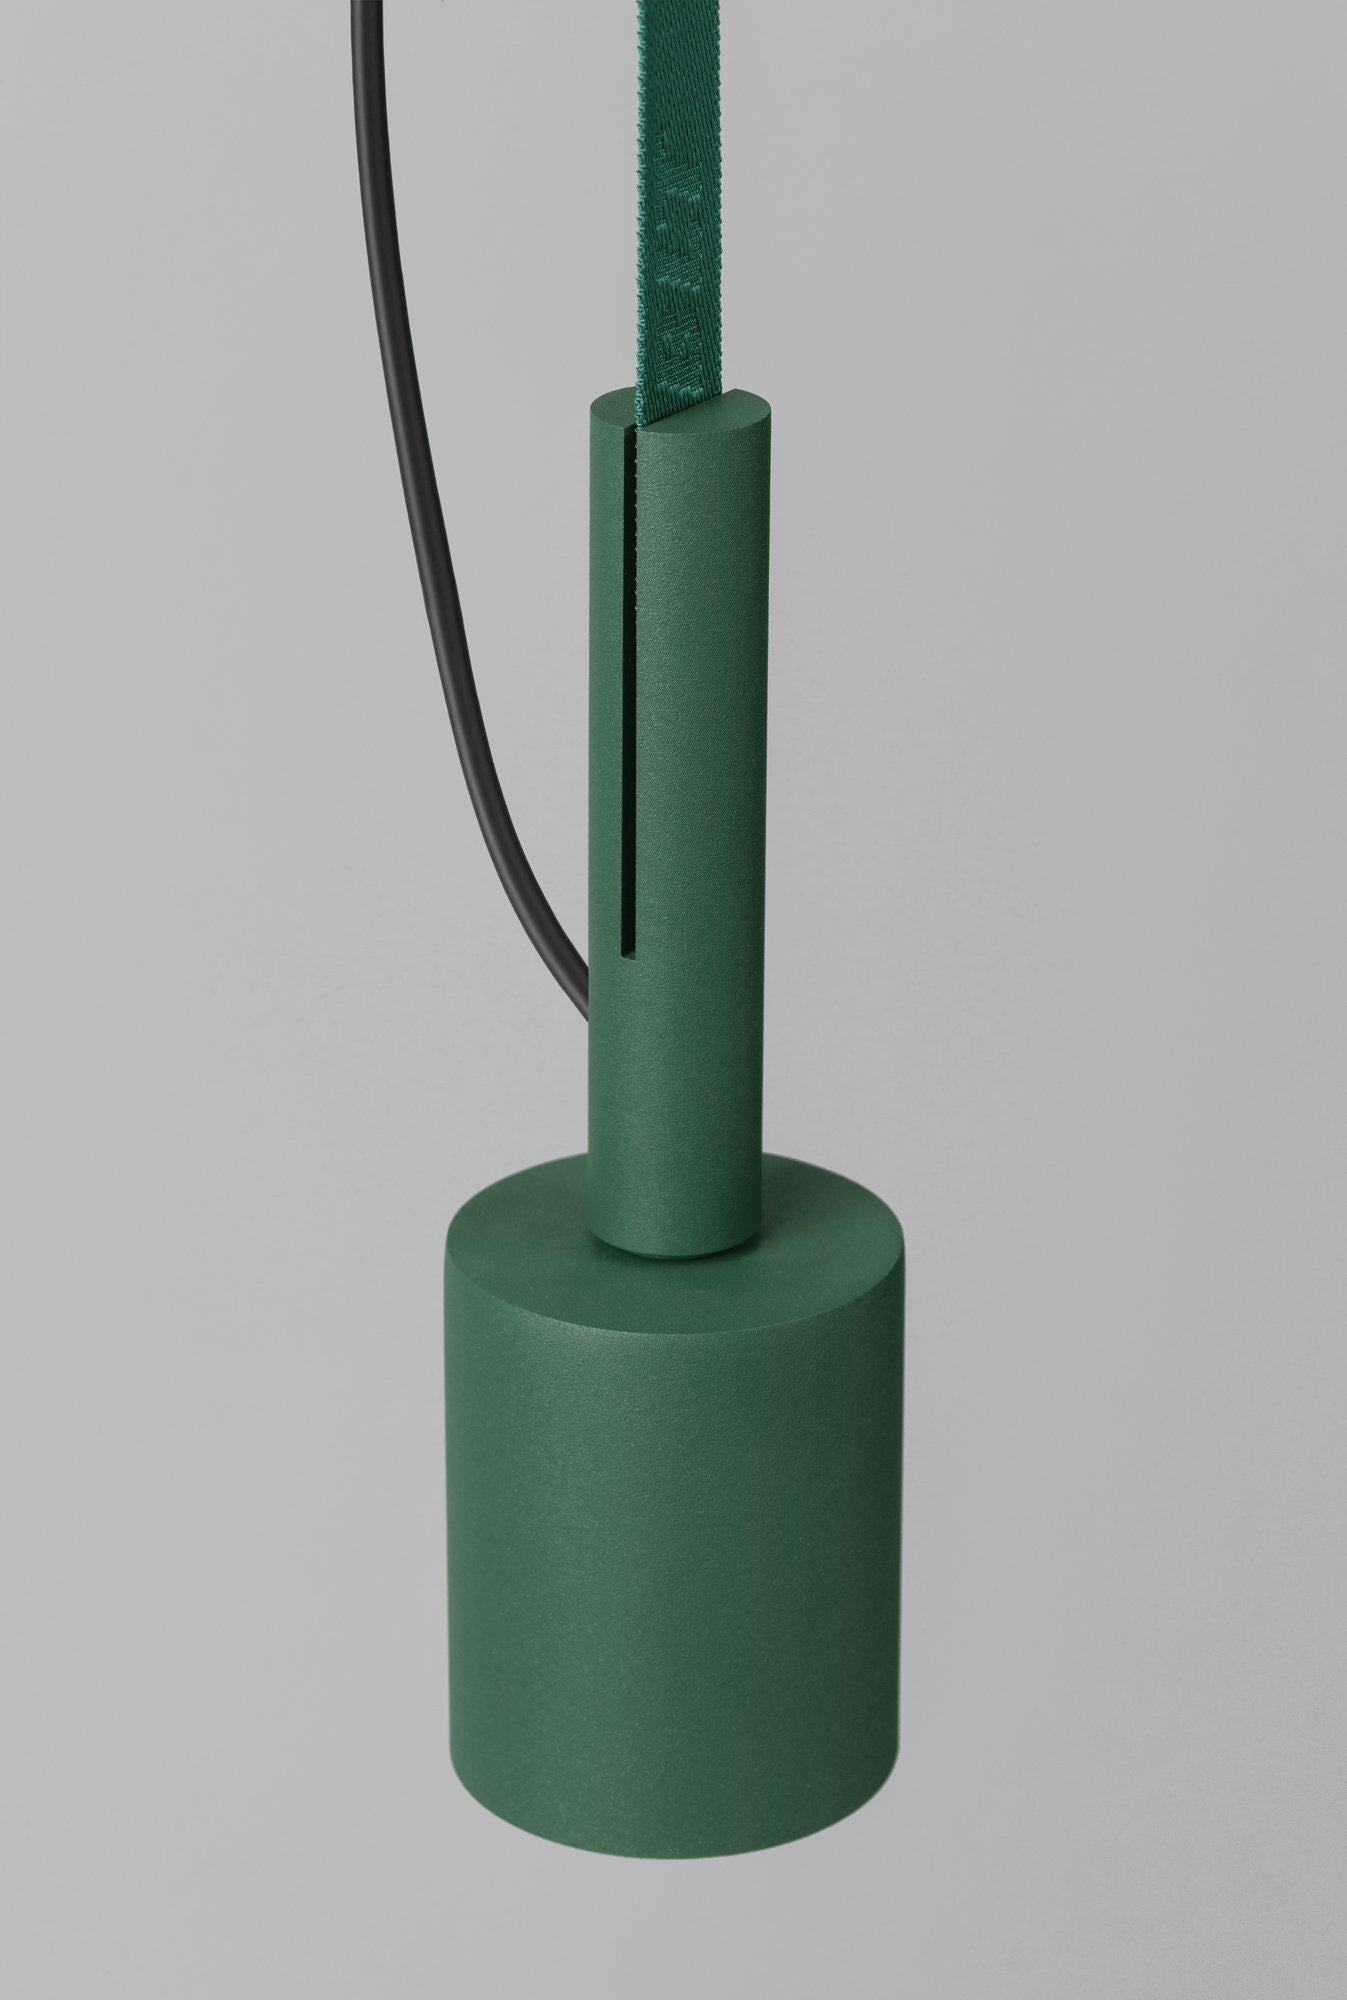 BLT_5 Forest Pendant Lamp by +kouple
Dimensions: Ø 8 x H 25,2 cm. 
Materials: Powder-coated steel and textile.

Available in different color options. The rod length is 250 cm. Please contact us.

All our lamps can be wired according to each country.